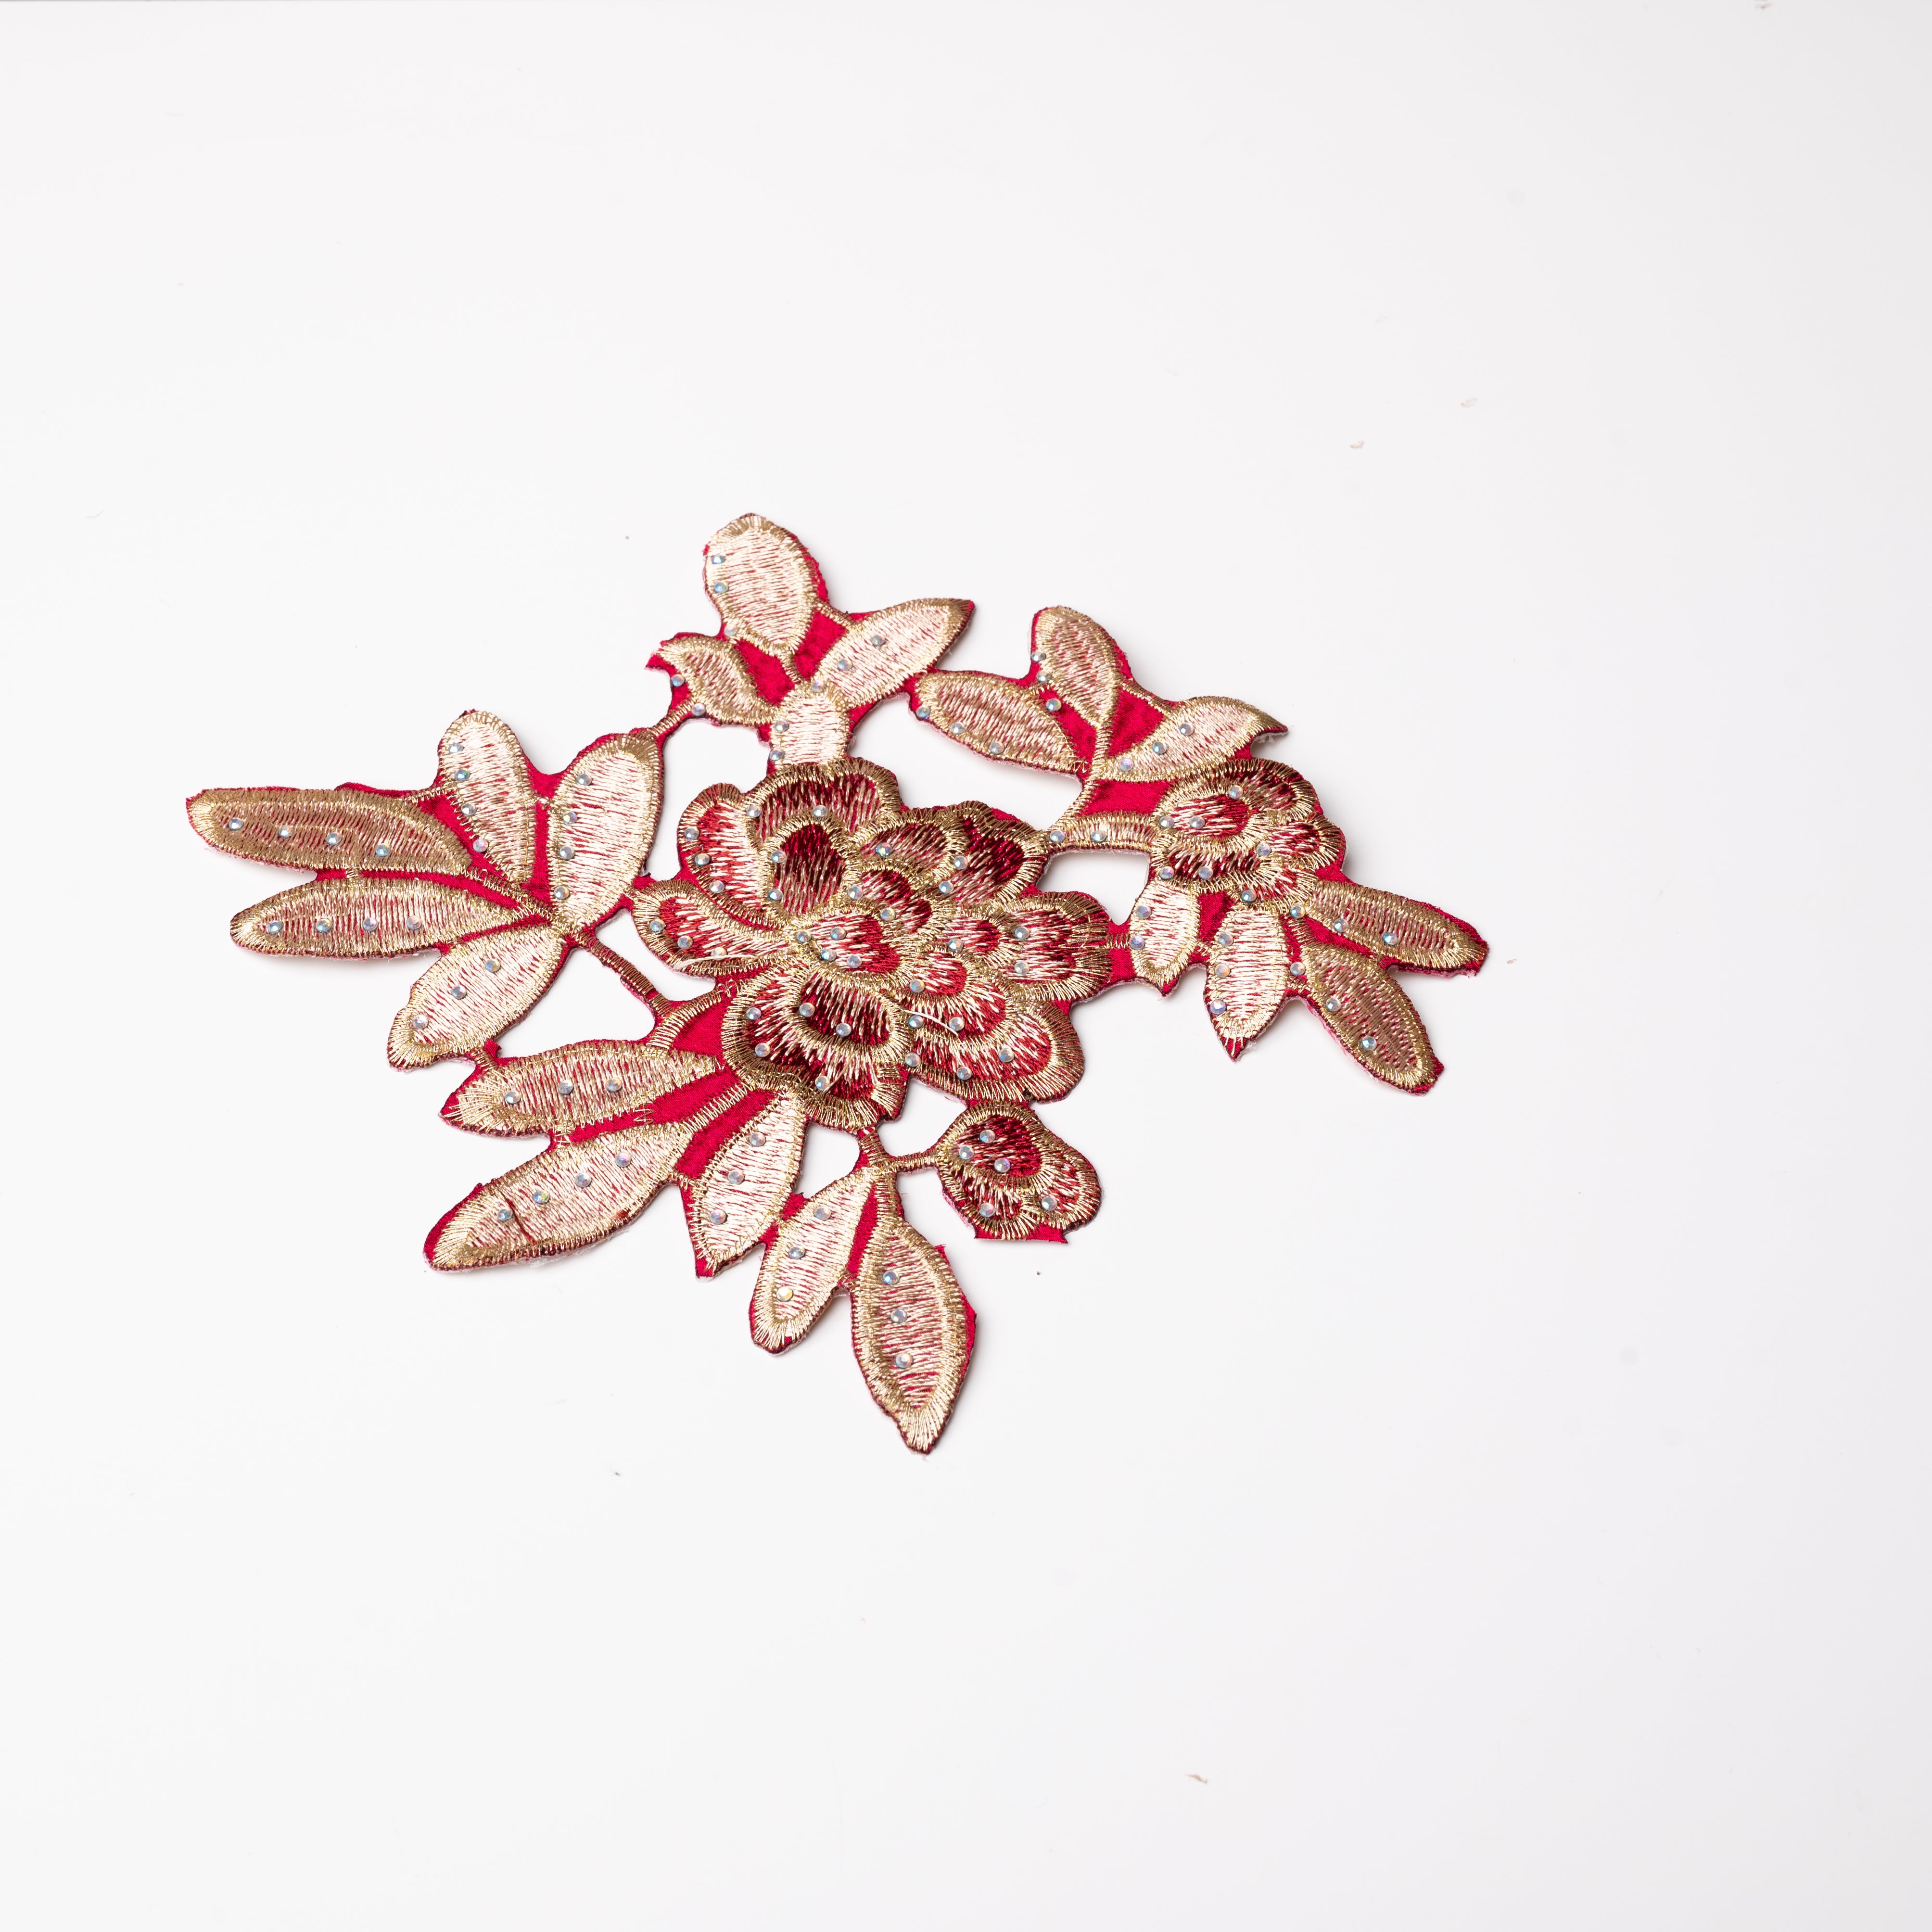 Heavily embroidered burgundy and gold floral iron on applique scattered with hot fix AB crystals.  The petals and leaves are predominantly gold and are outlined with gold thread.